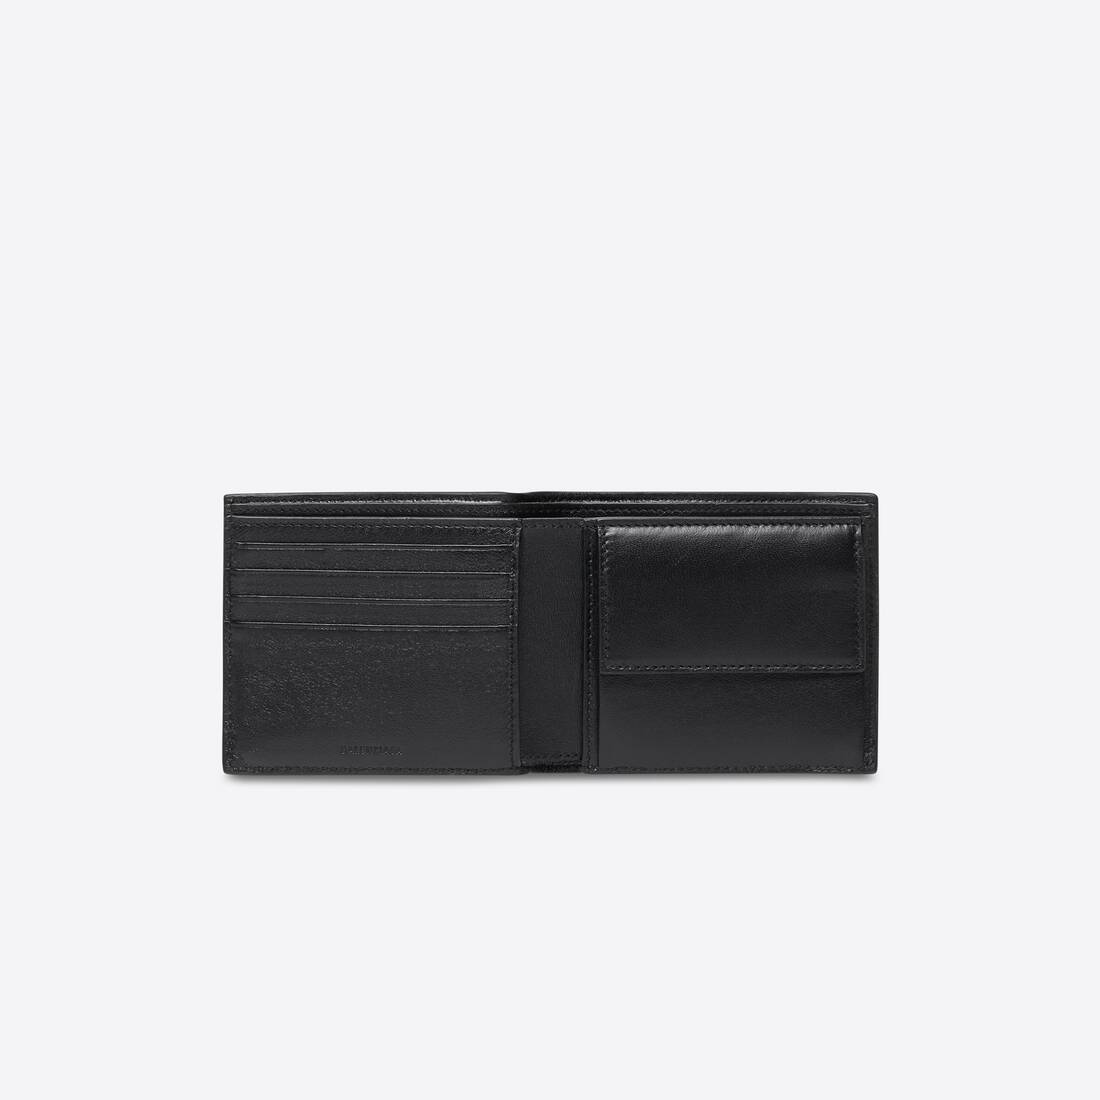 Men's Plate Square Folded Coin Wallet in Black